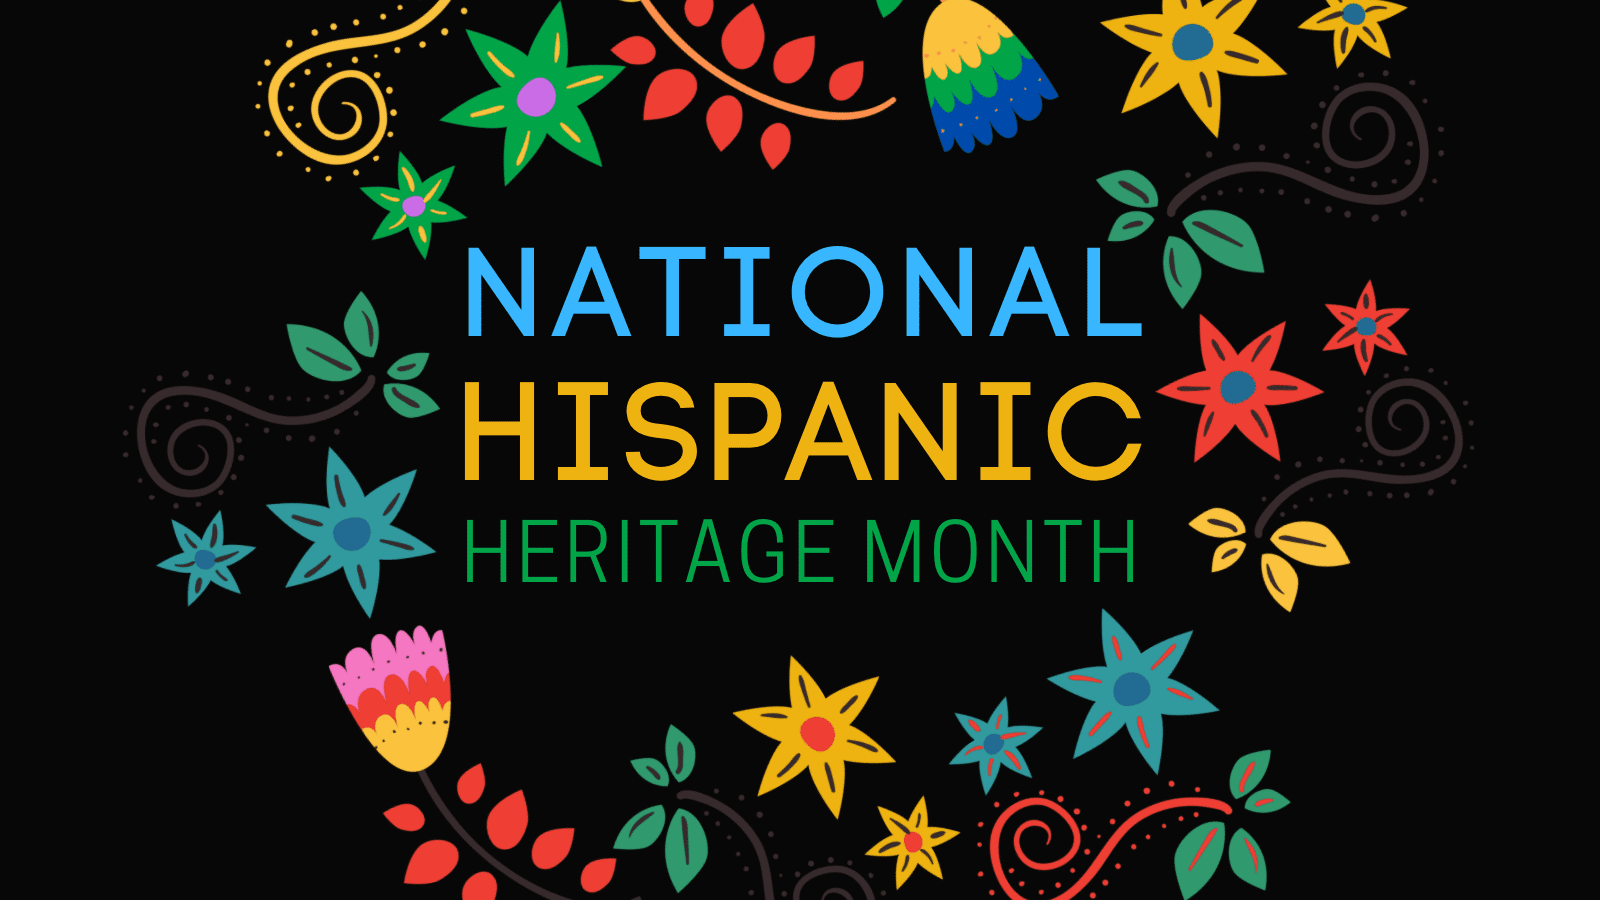 It's Not Too Late to Celebrate Hispanic Heritage Month!